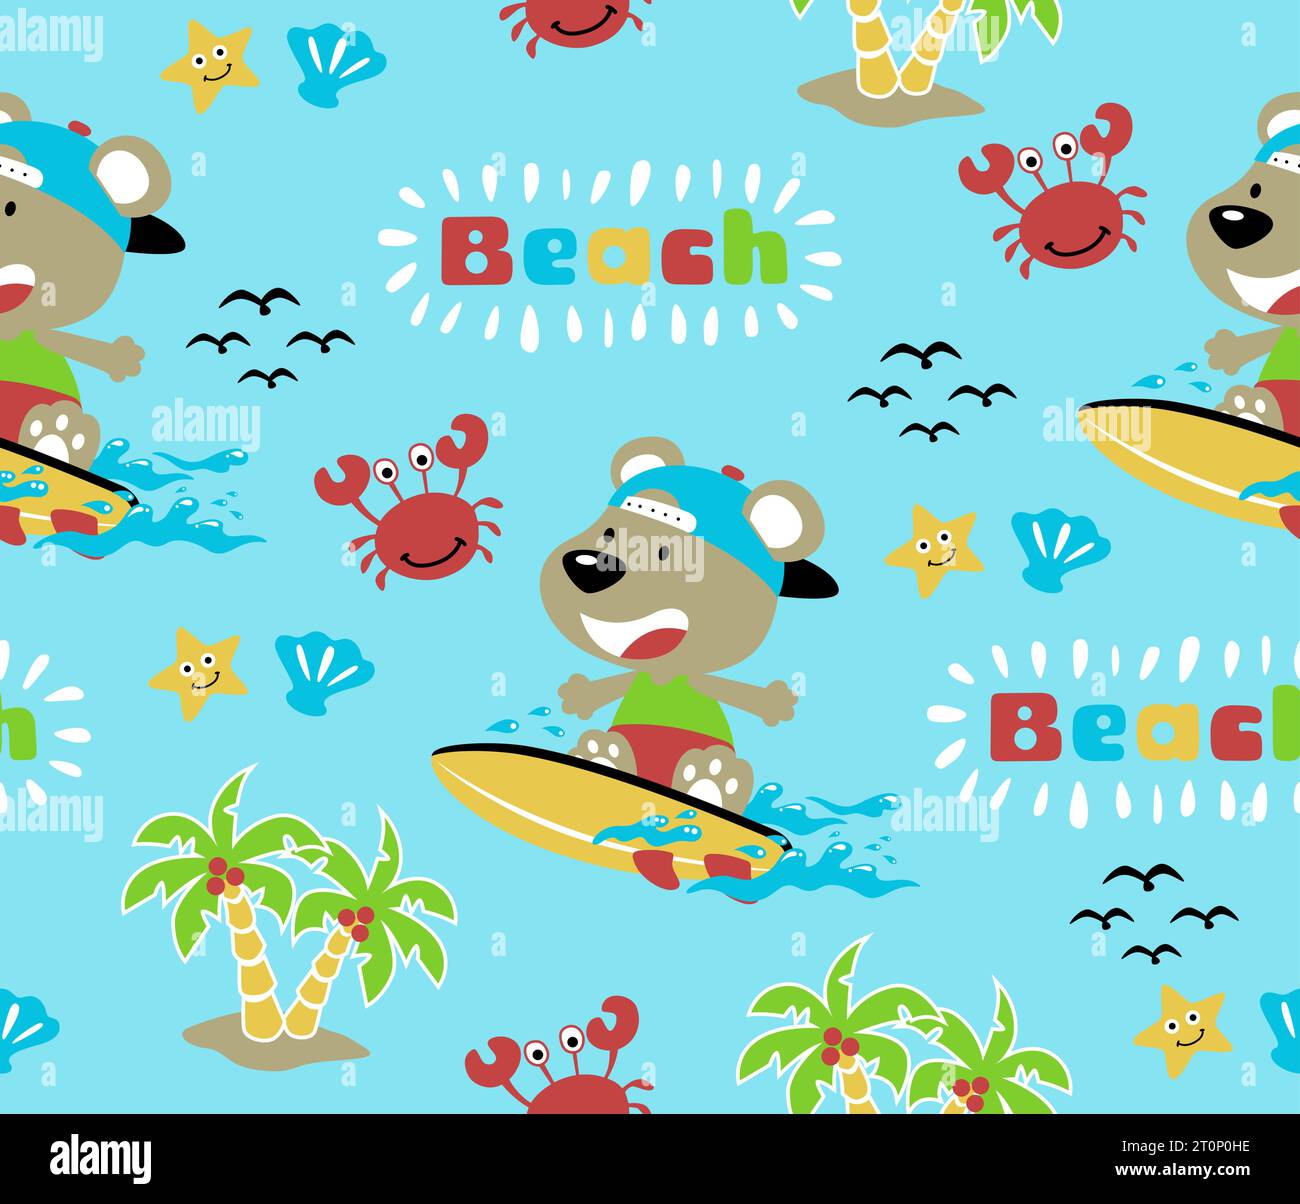 vector seamless pattern of cartoon bear in surfing with beach elements Stock Vector